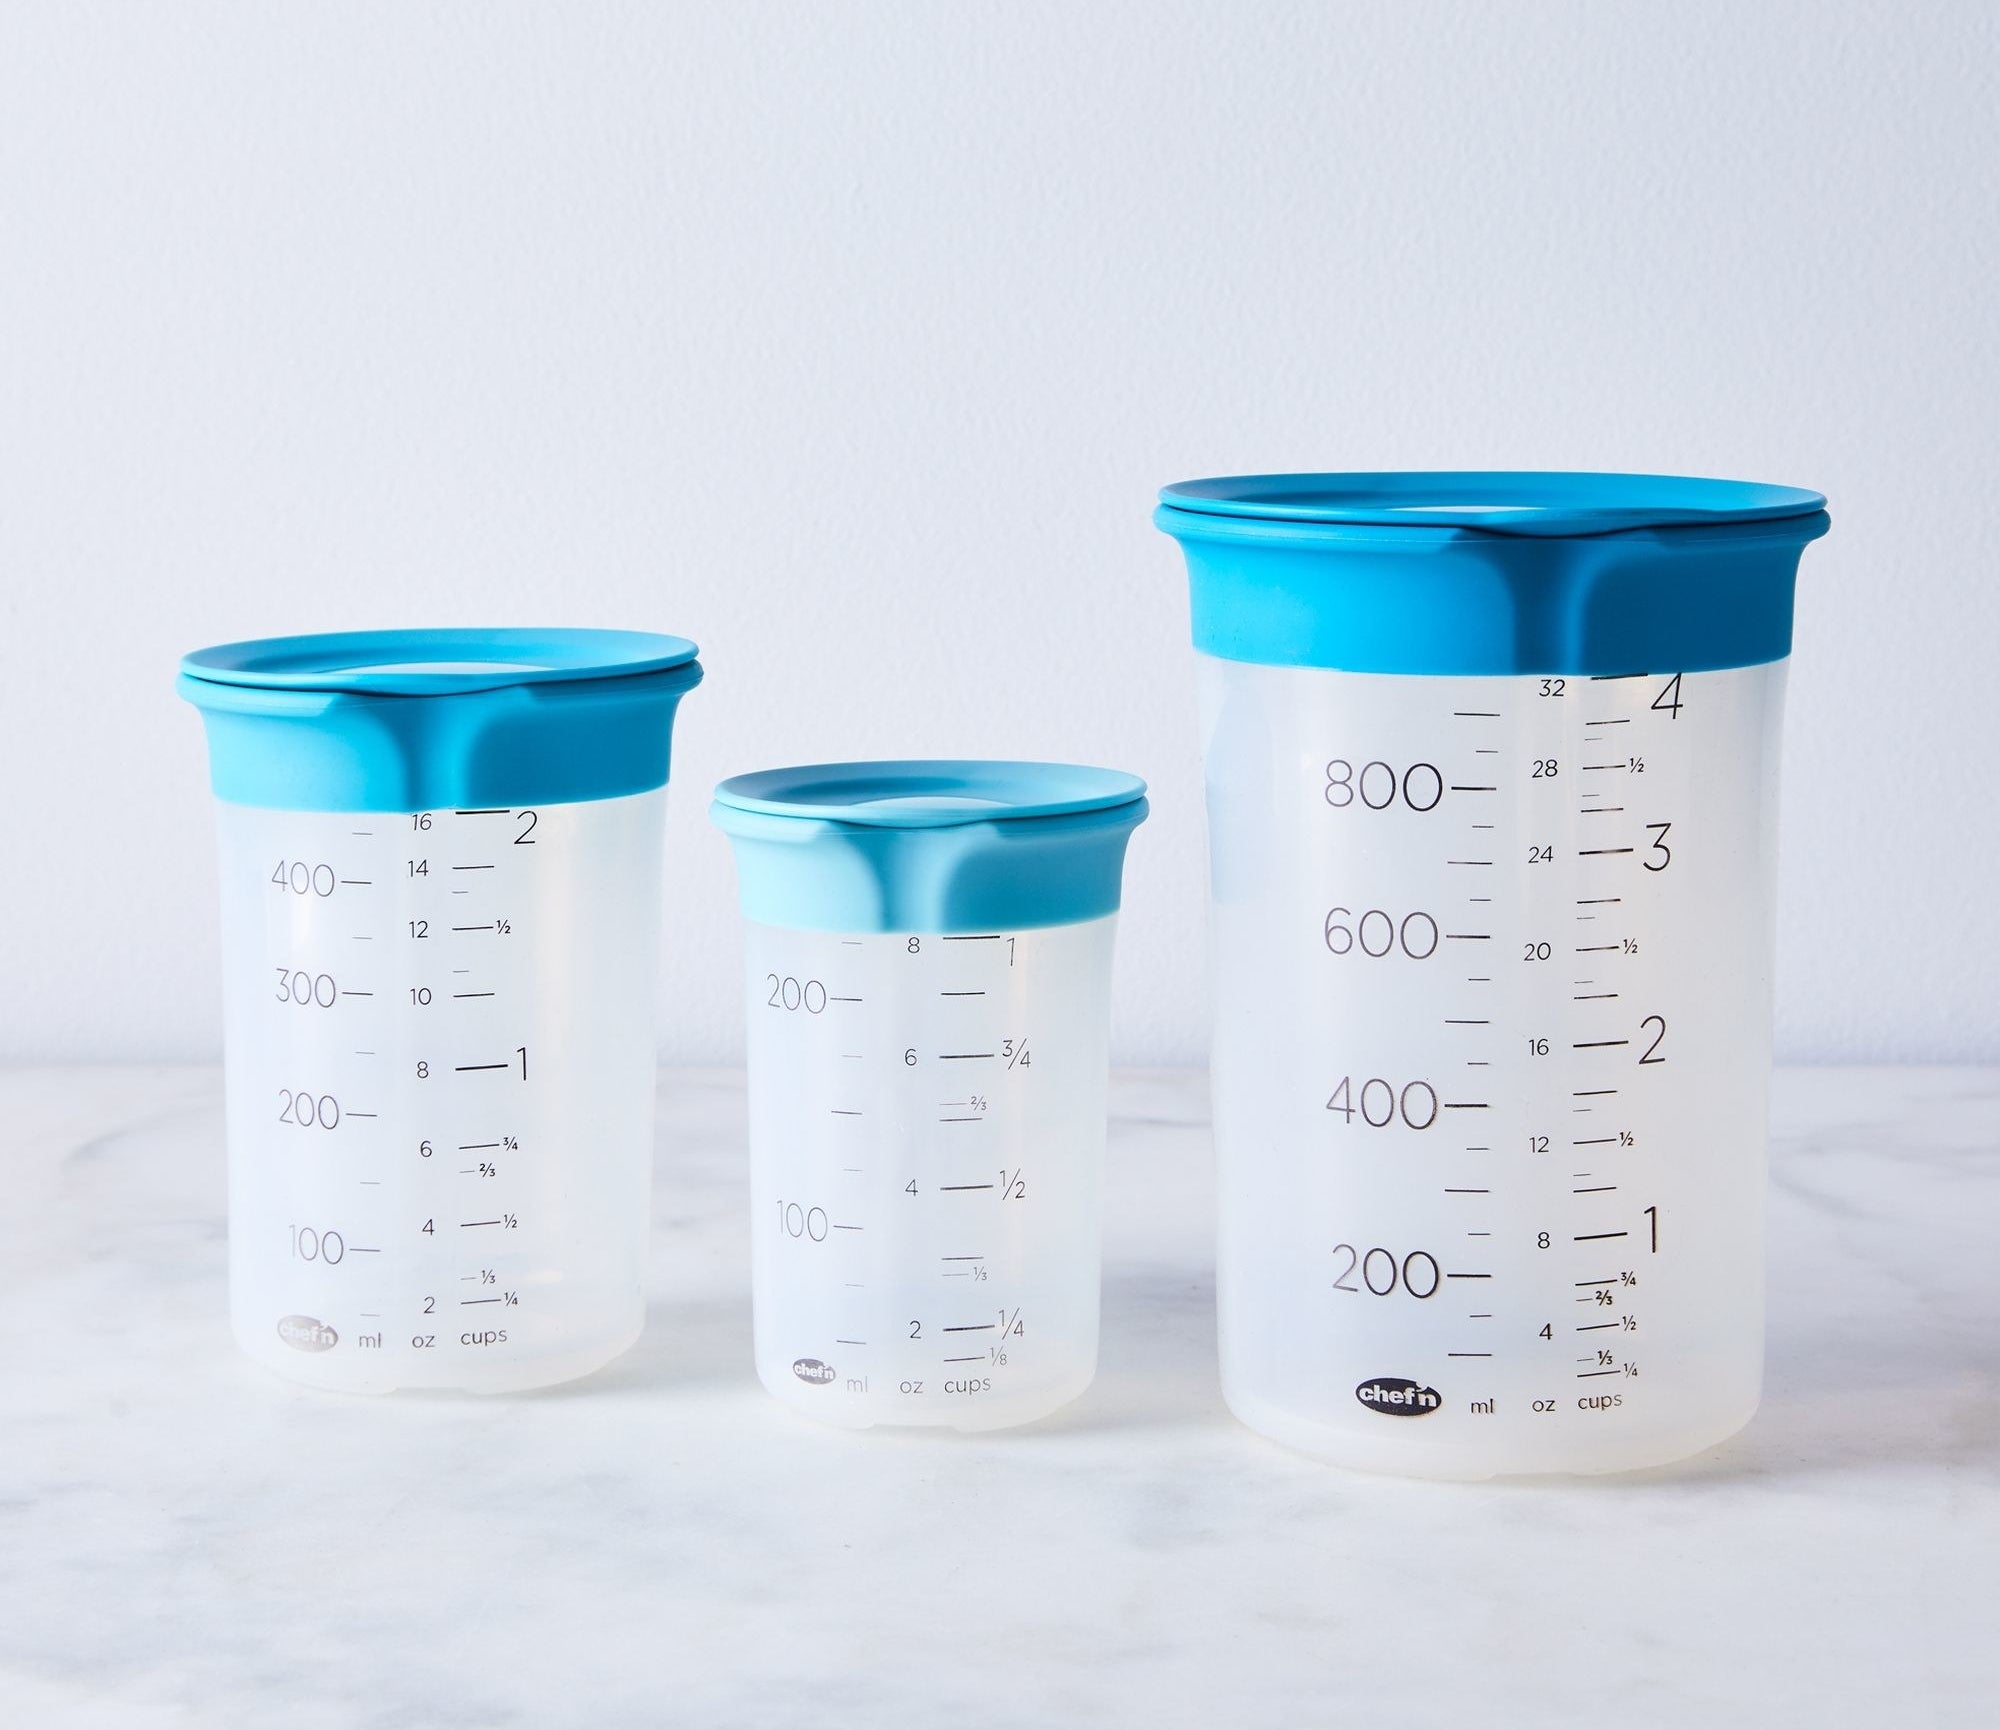 three different size plastic measuring cups with spouts and blue lids